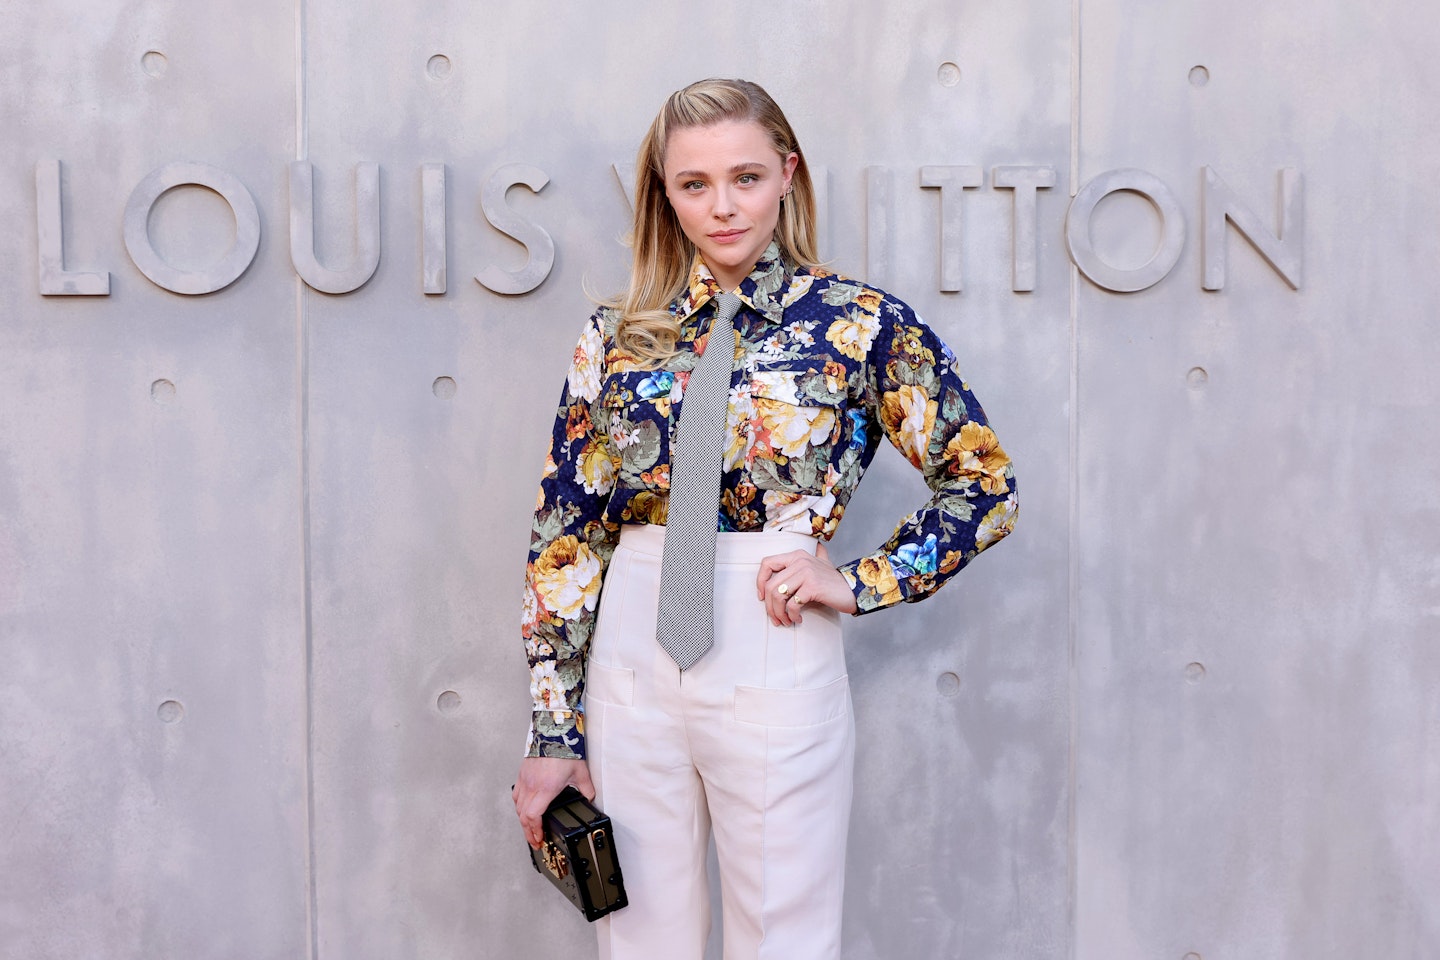 Chloe Grace Moretz spotted with her Louis Vuitton luggage as she